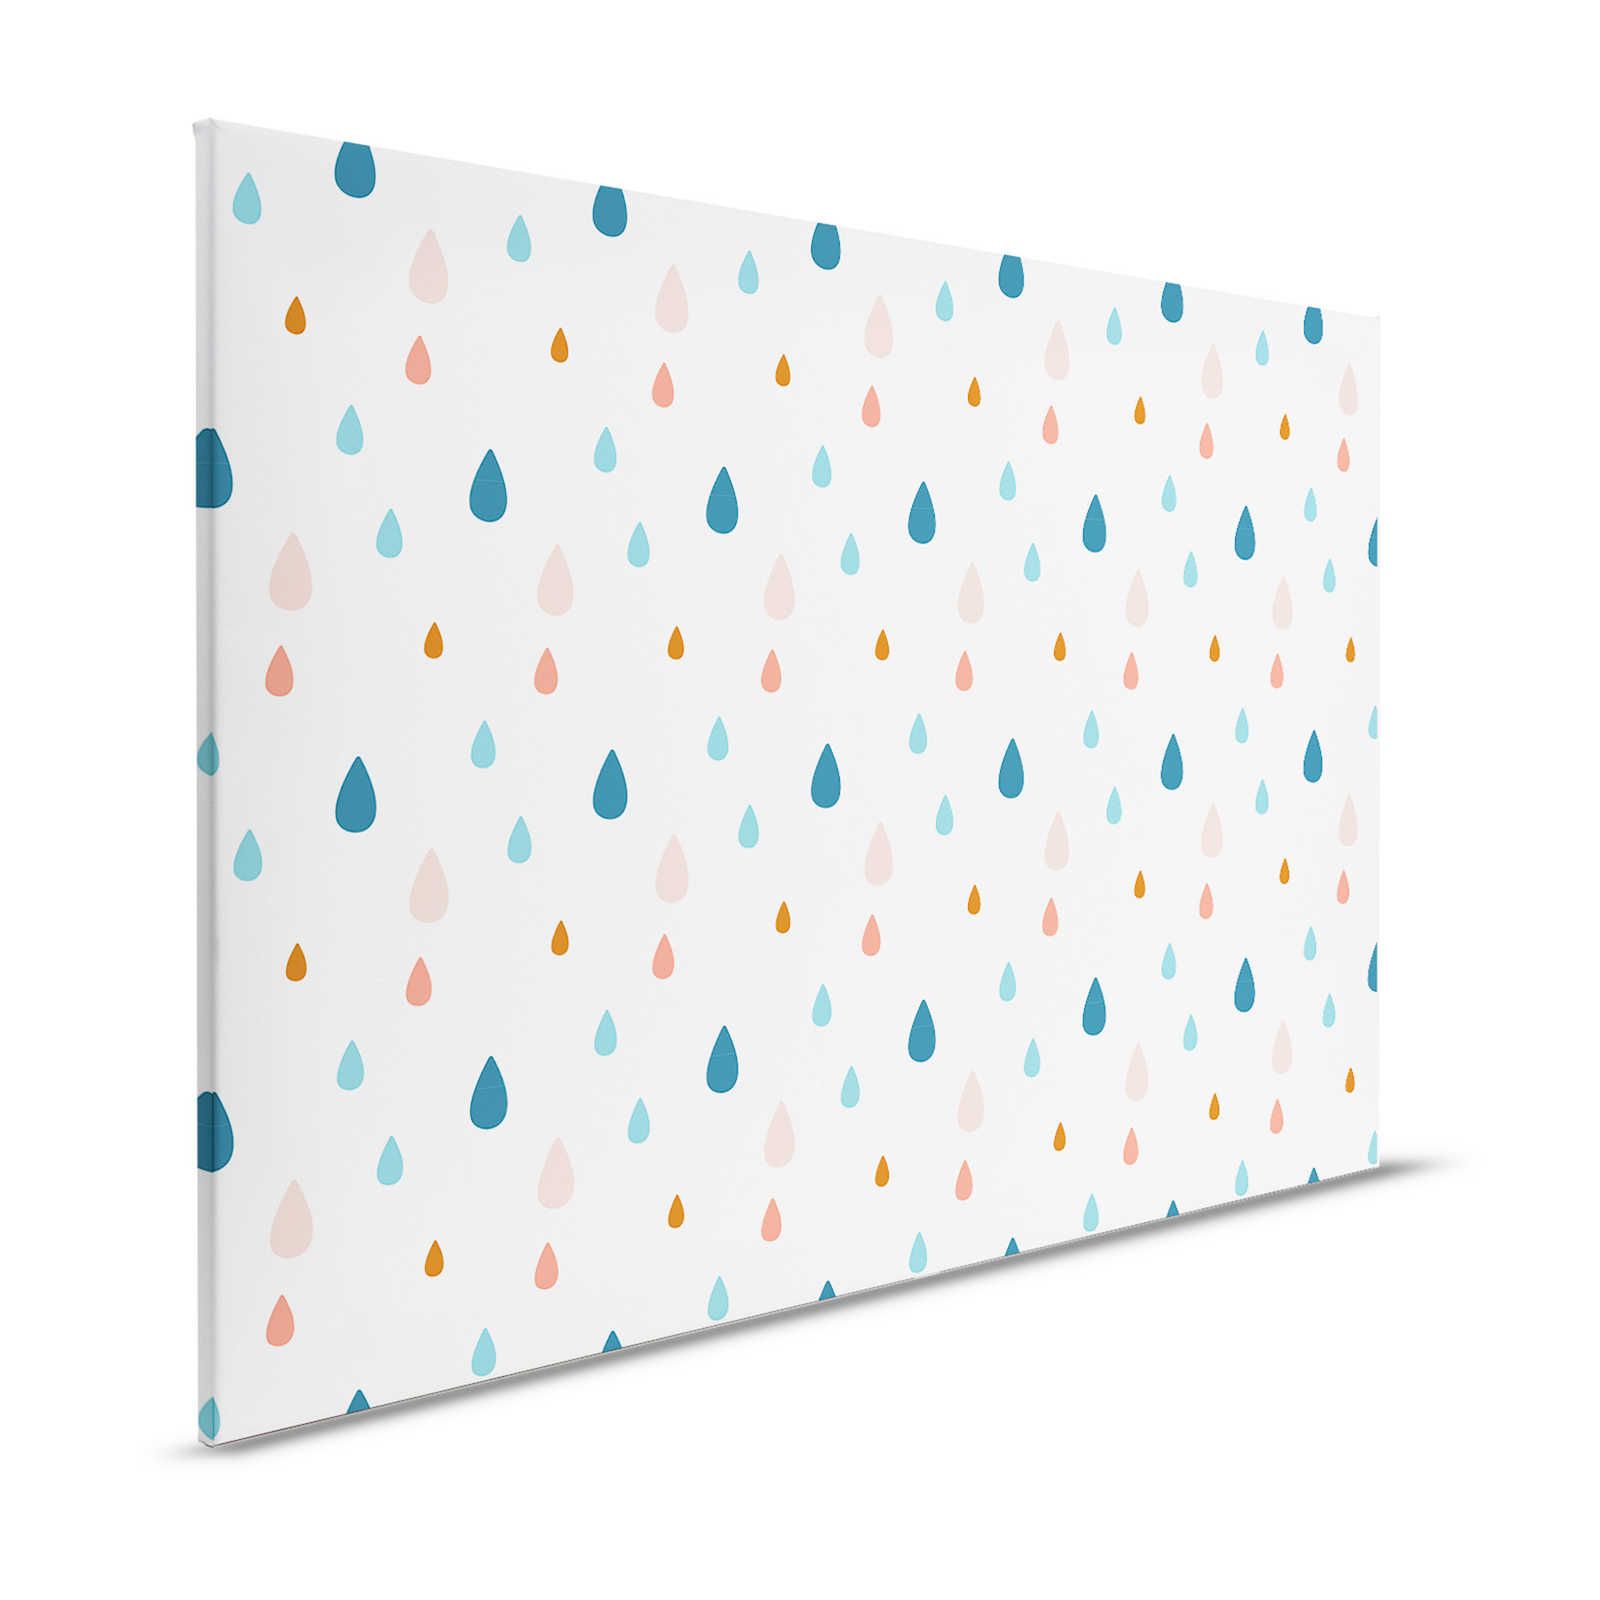 Canvas for children's room with colourful water drops - 120 cm x 80 cm
